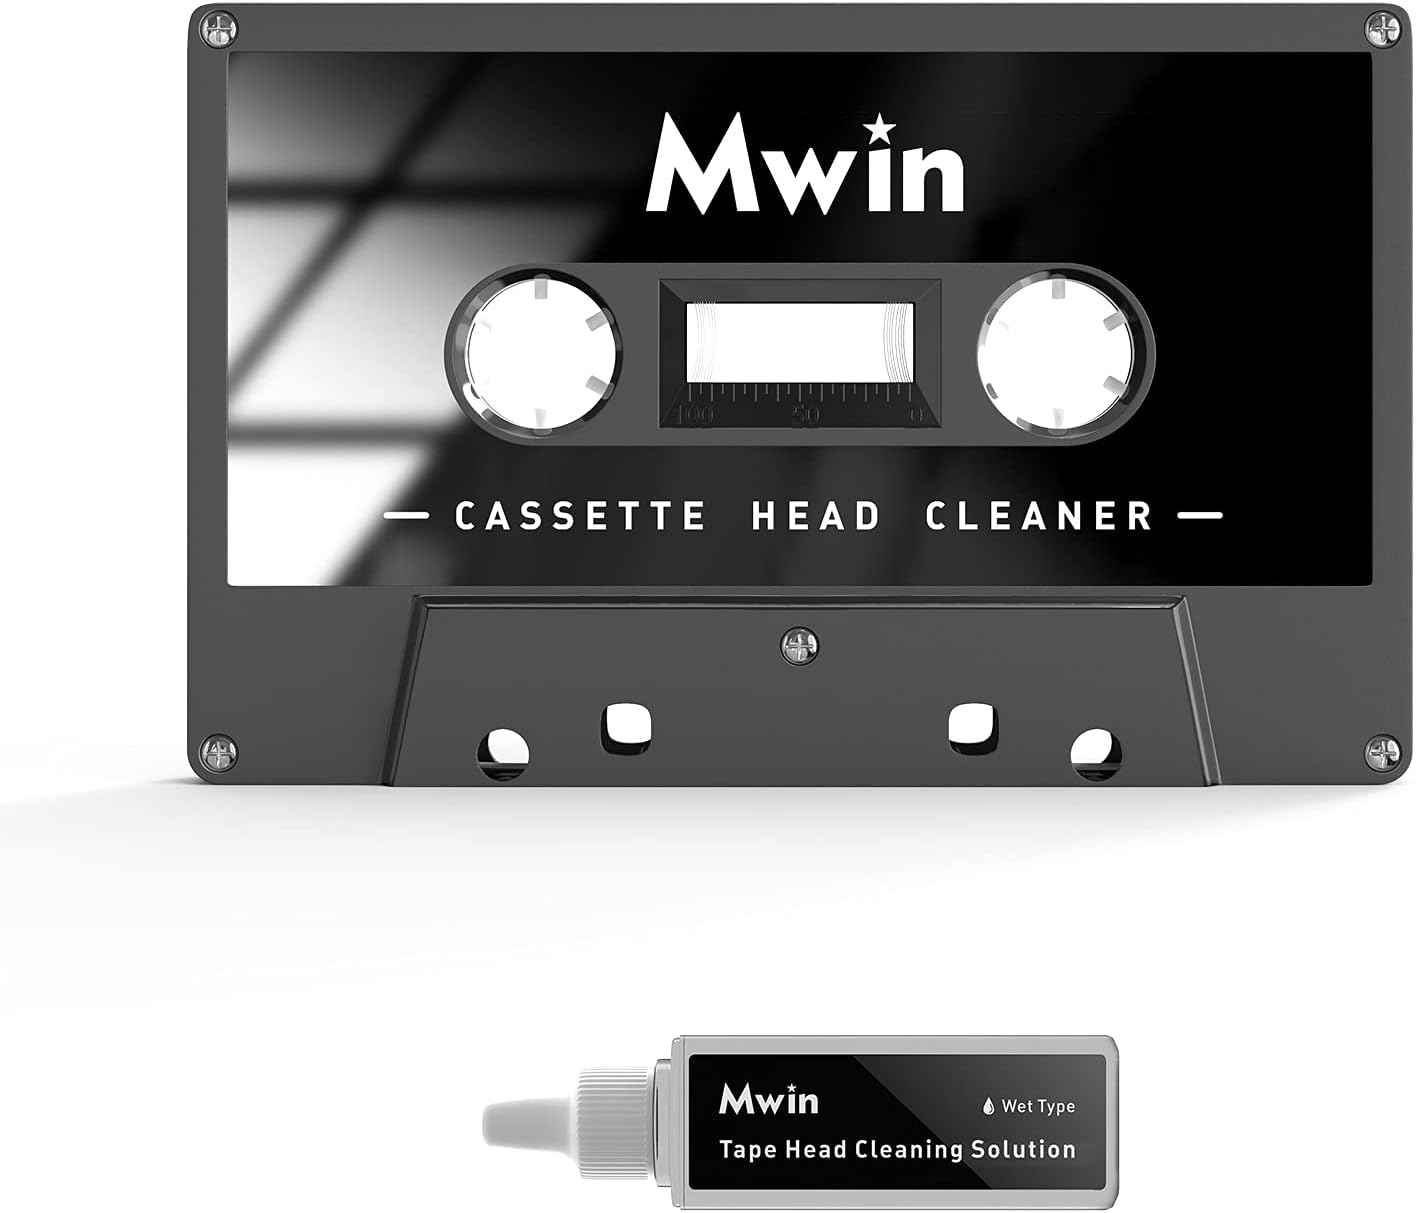 Mwin Audio Cassette Head Cleaner Tape w/ 1 Cleaning [...]